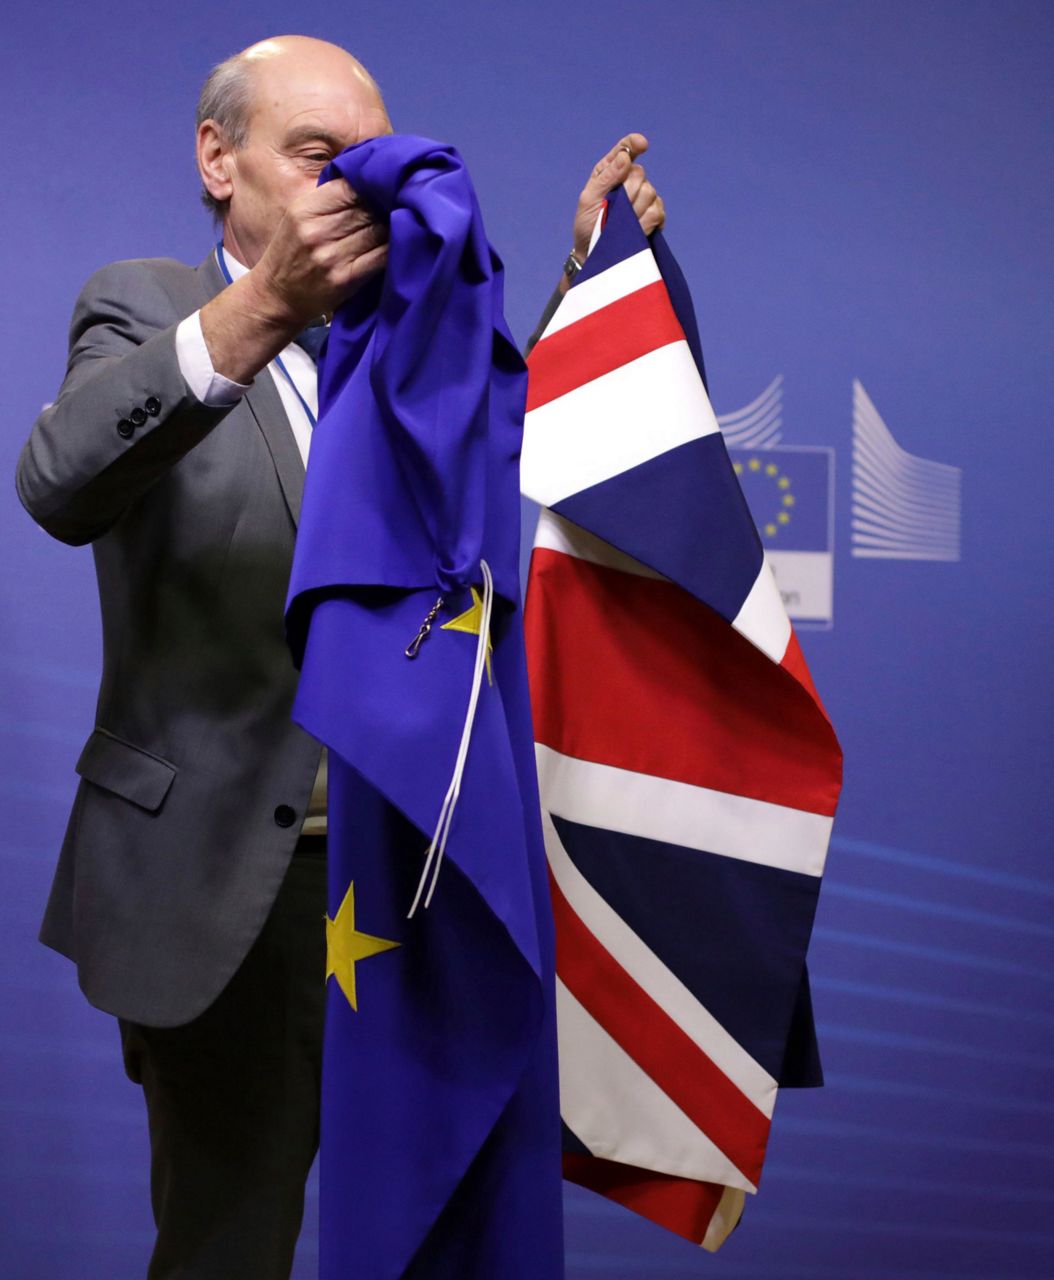 The Latest: Lithuania: Brexit next steps 'up to Britain'